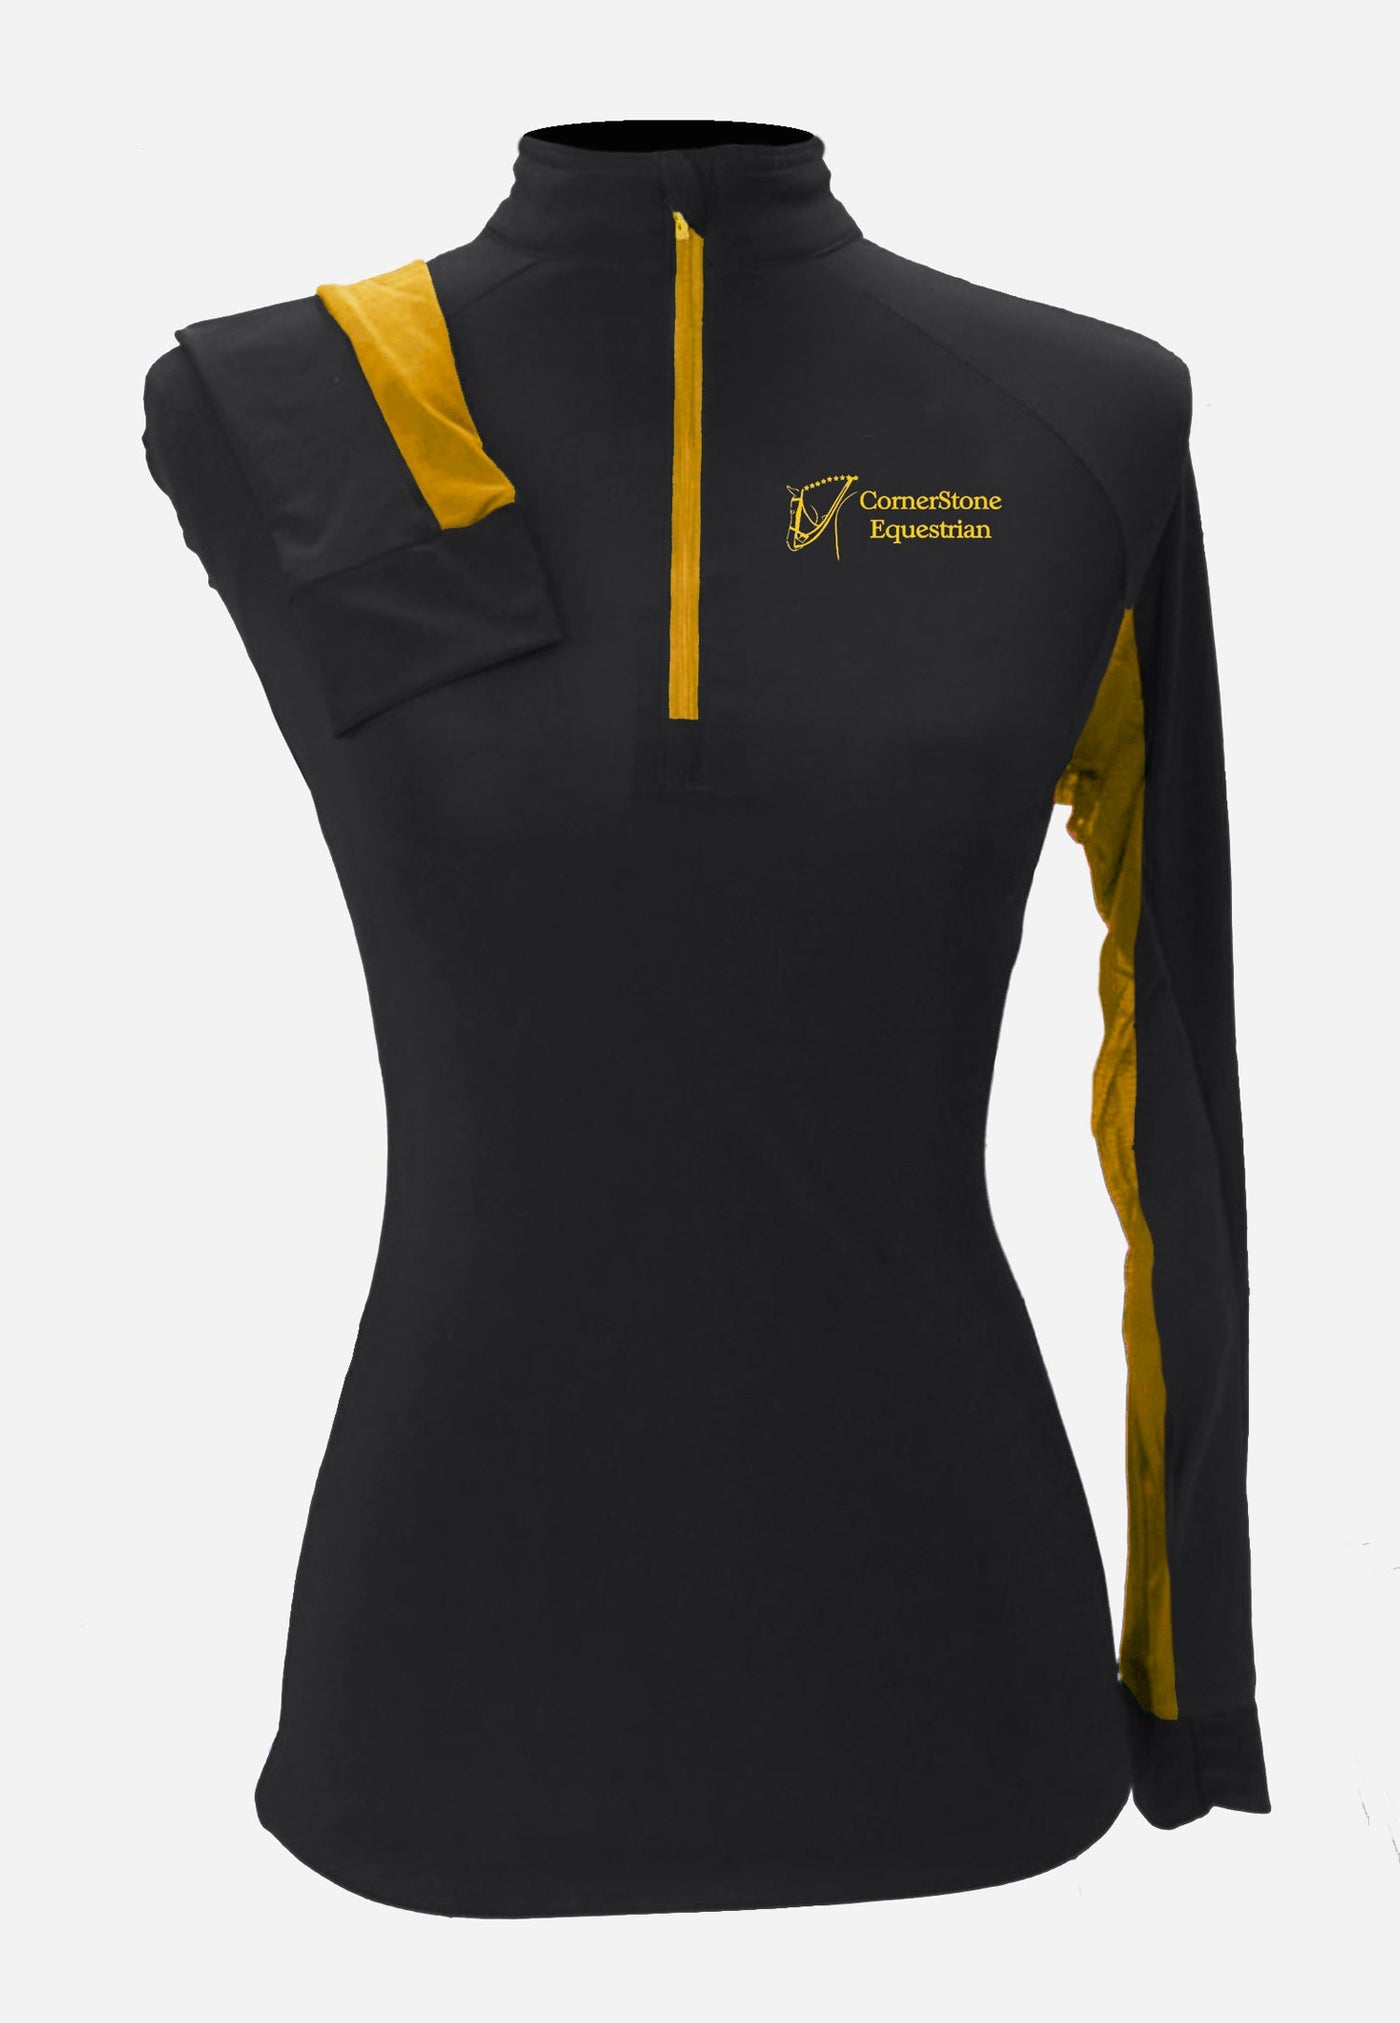 Cornerstone Equestrian Custom Sun Shirt - Black with Gold Accents    Adult + Youth Sizes